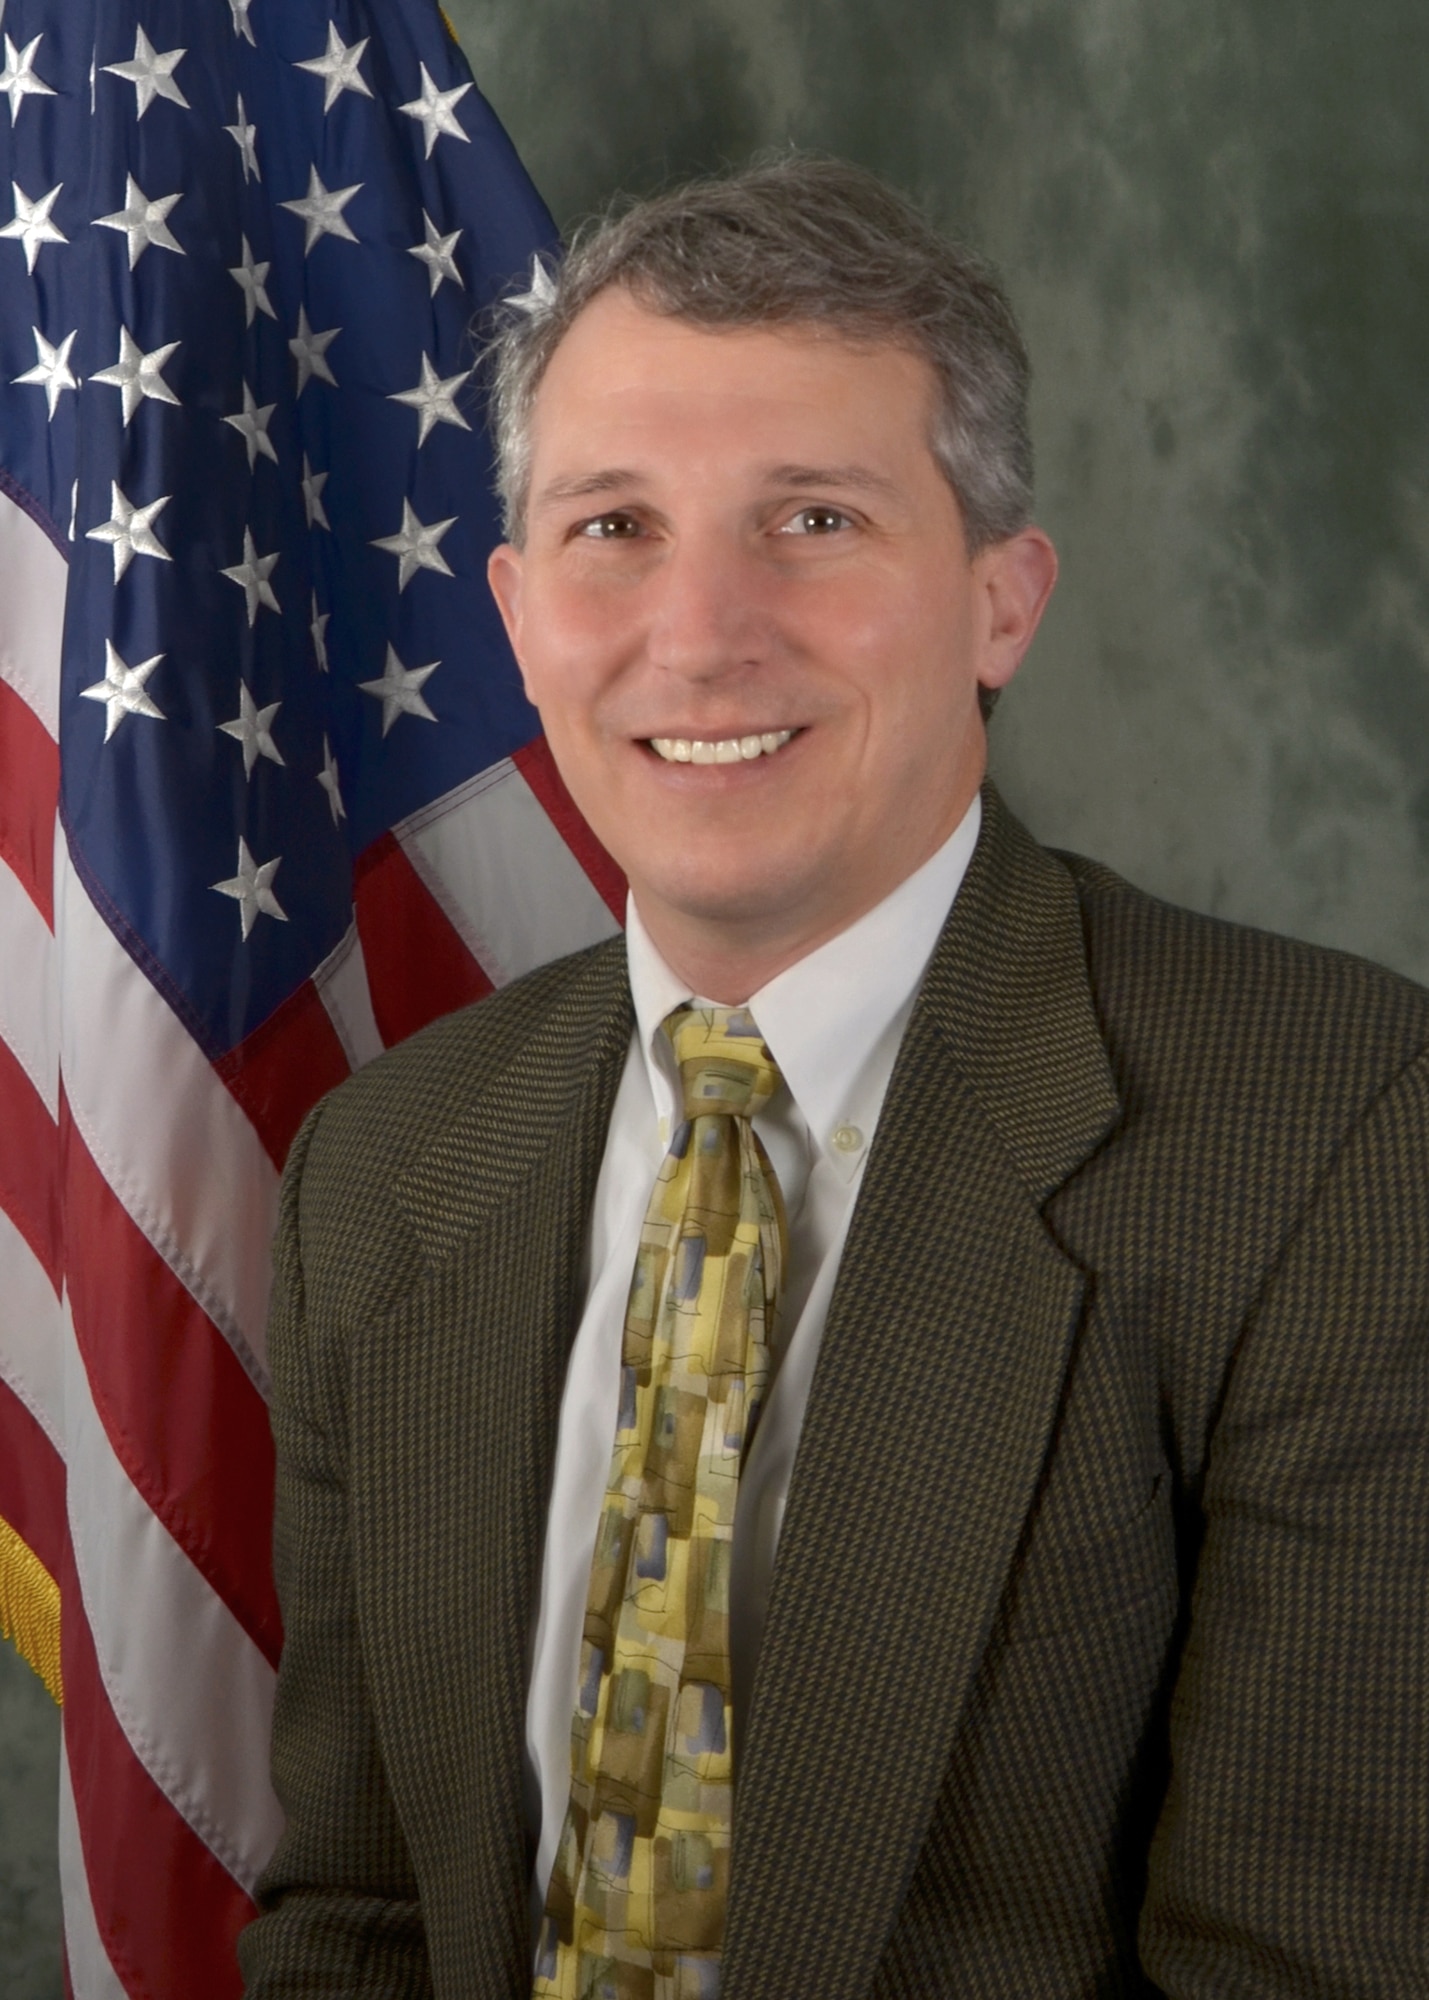 Dr. Richard A. Vaia, Chief Scientist at AFRL's Materials and Manufacturing Directorate, is a member of the National Academy of Engineering Class of 2020. (U.S. Air Force photo)